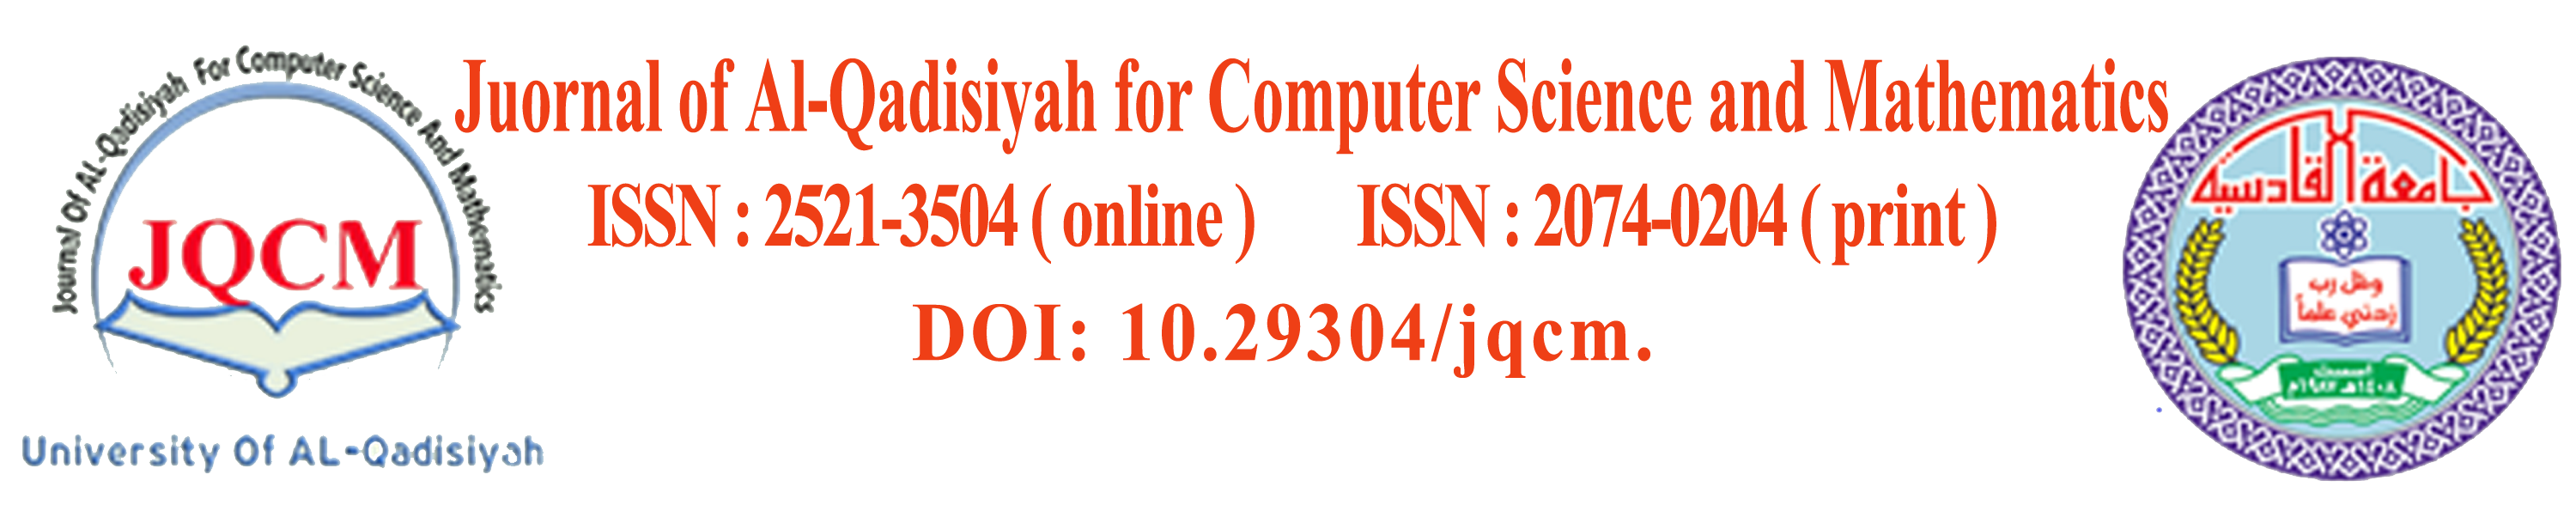 Journal of Al-Qadisiyah for computer science and mathematics (JQCM) is a peer-reviewed scientific journal issued by College of computer Science and Information Technology /University of Al-Qadisiyah since 2009 periodically 2 times per year. ISSN 2521-3504 (Online), ISSN 2074-0204 (Print).